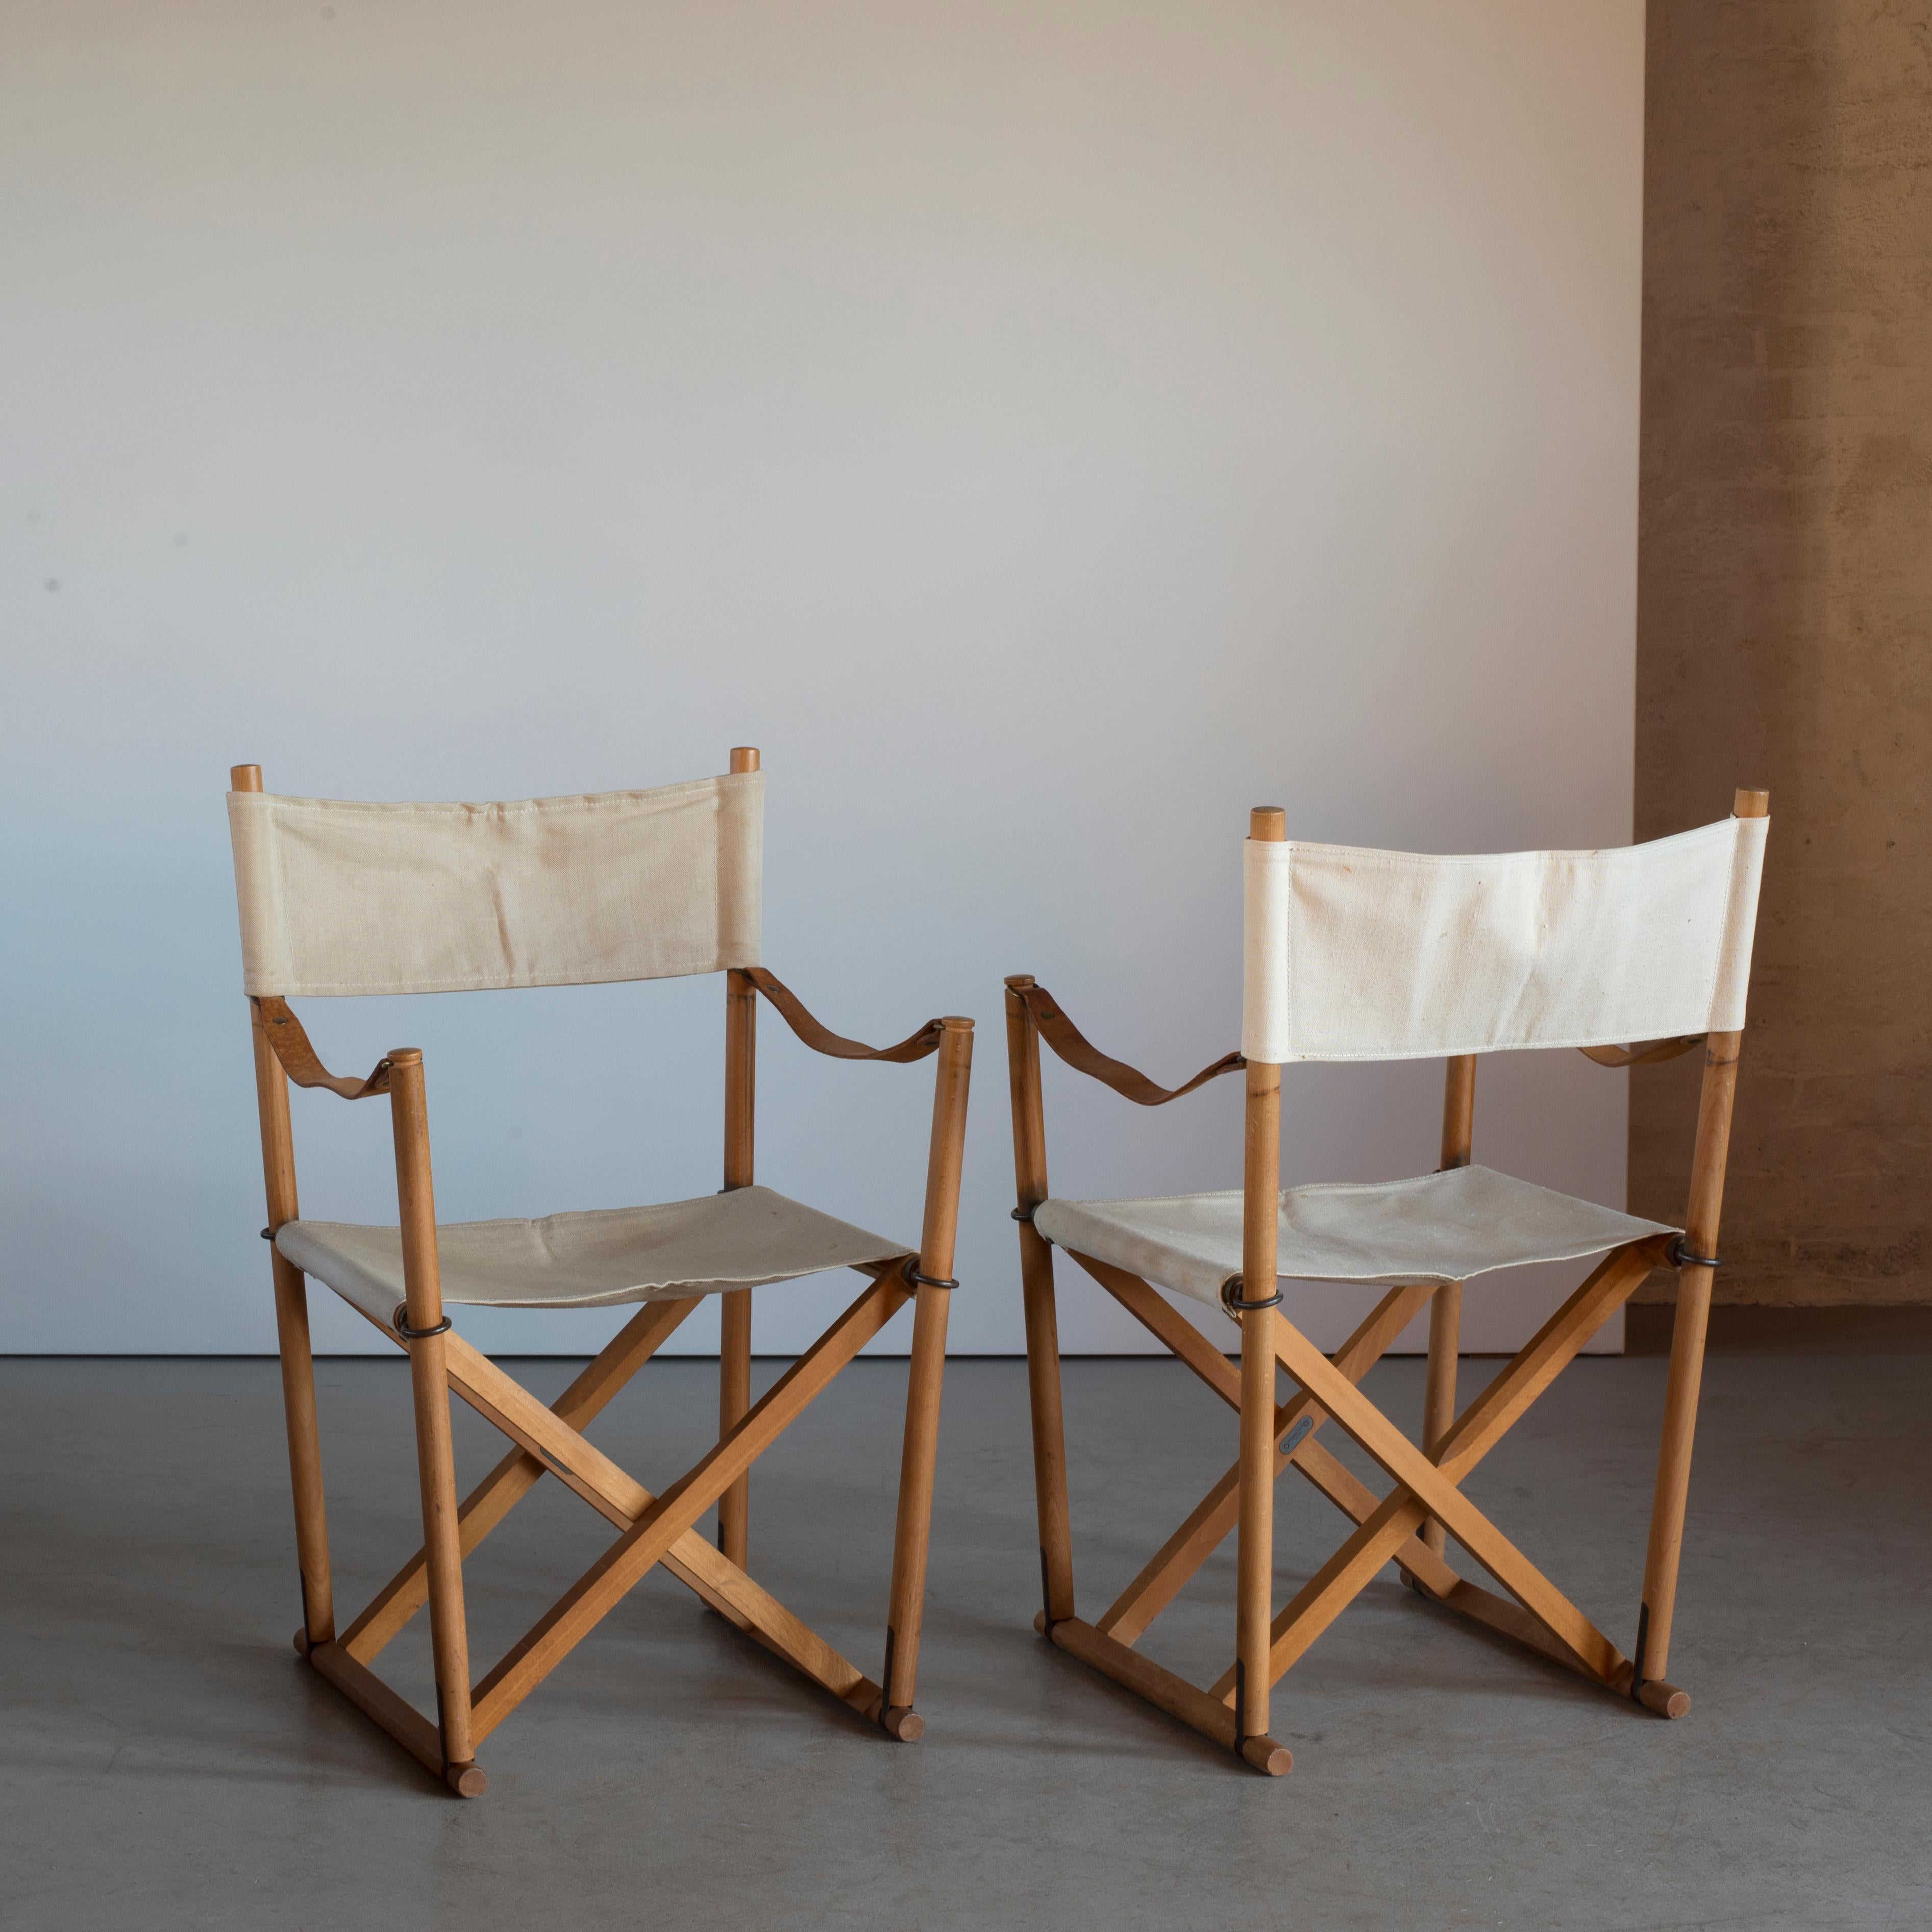 Mogens Koch pair of folding chairs in beech and canvas. Executed by Interna, Denmark.